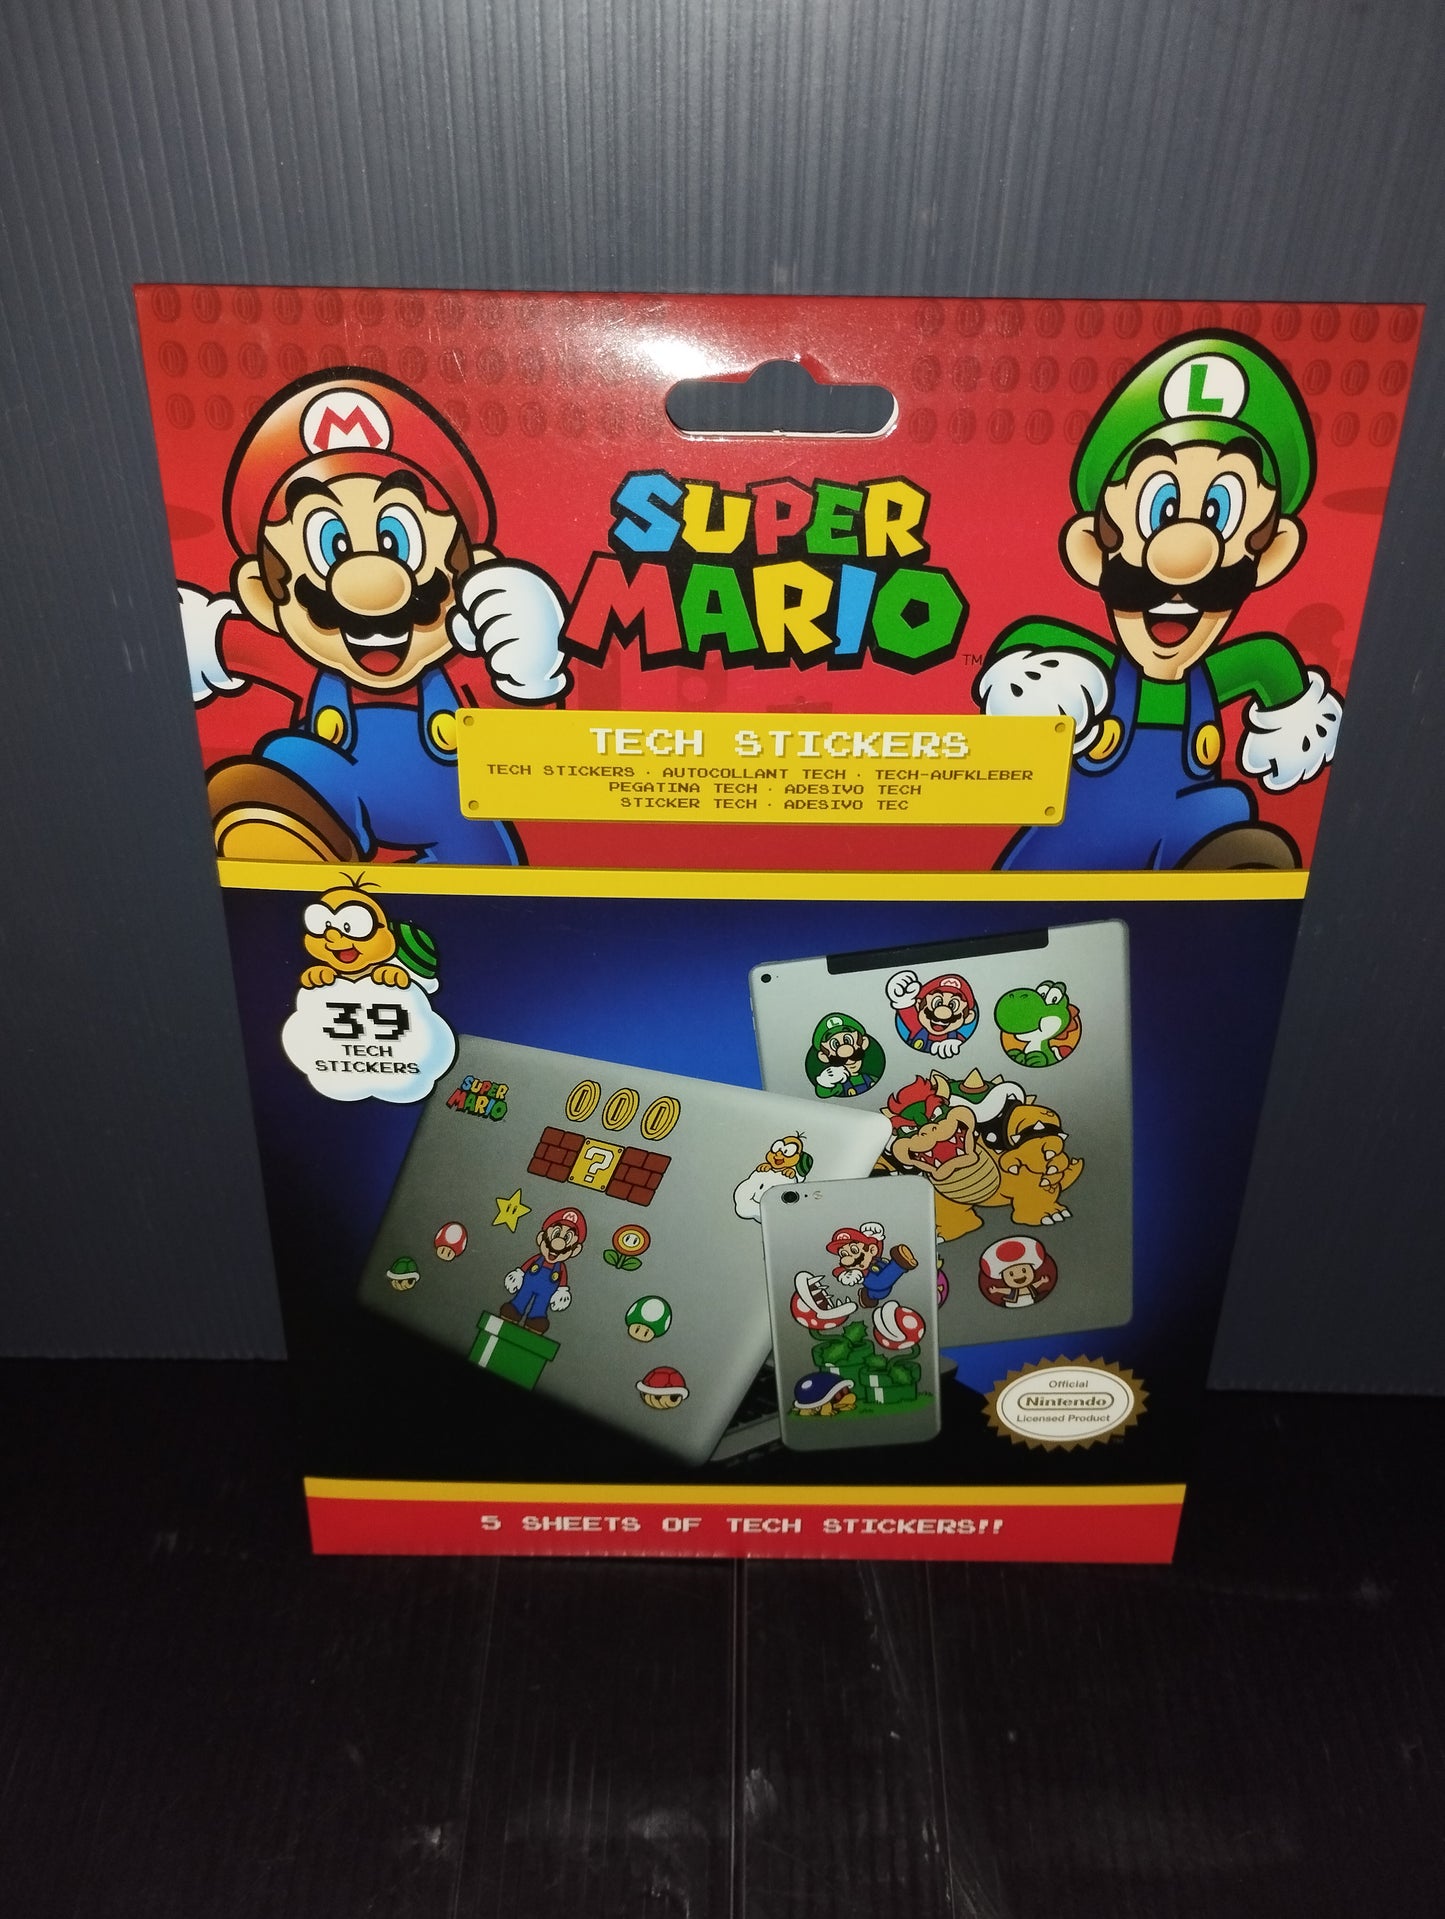 Super Mario 39 Tech Stickers

Official Nintendo Licensed Product